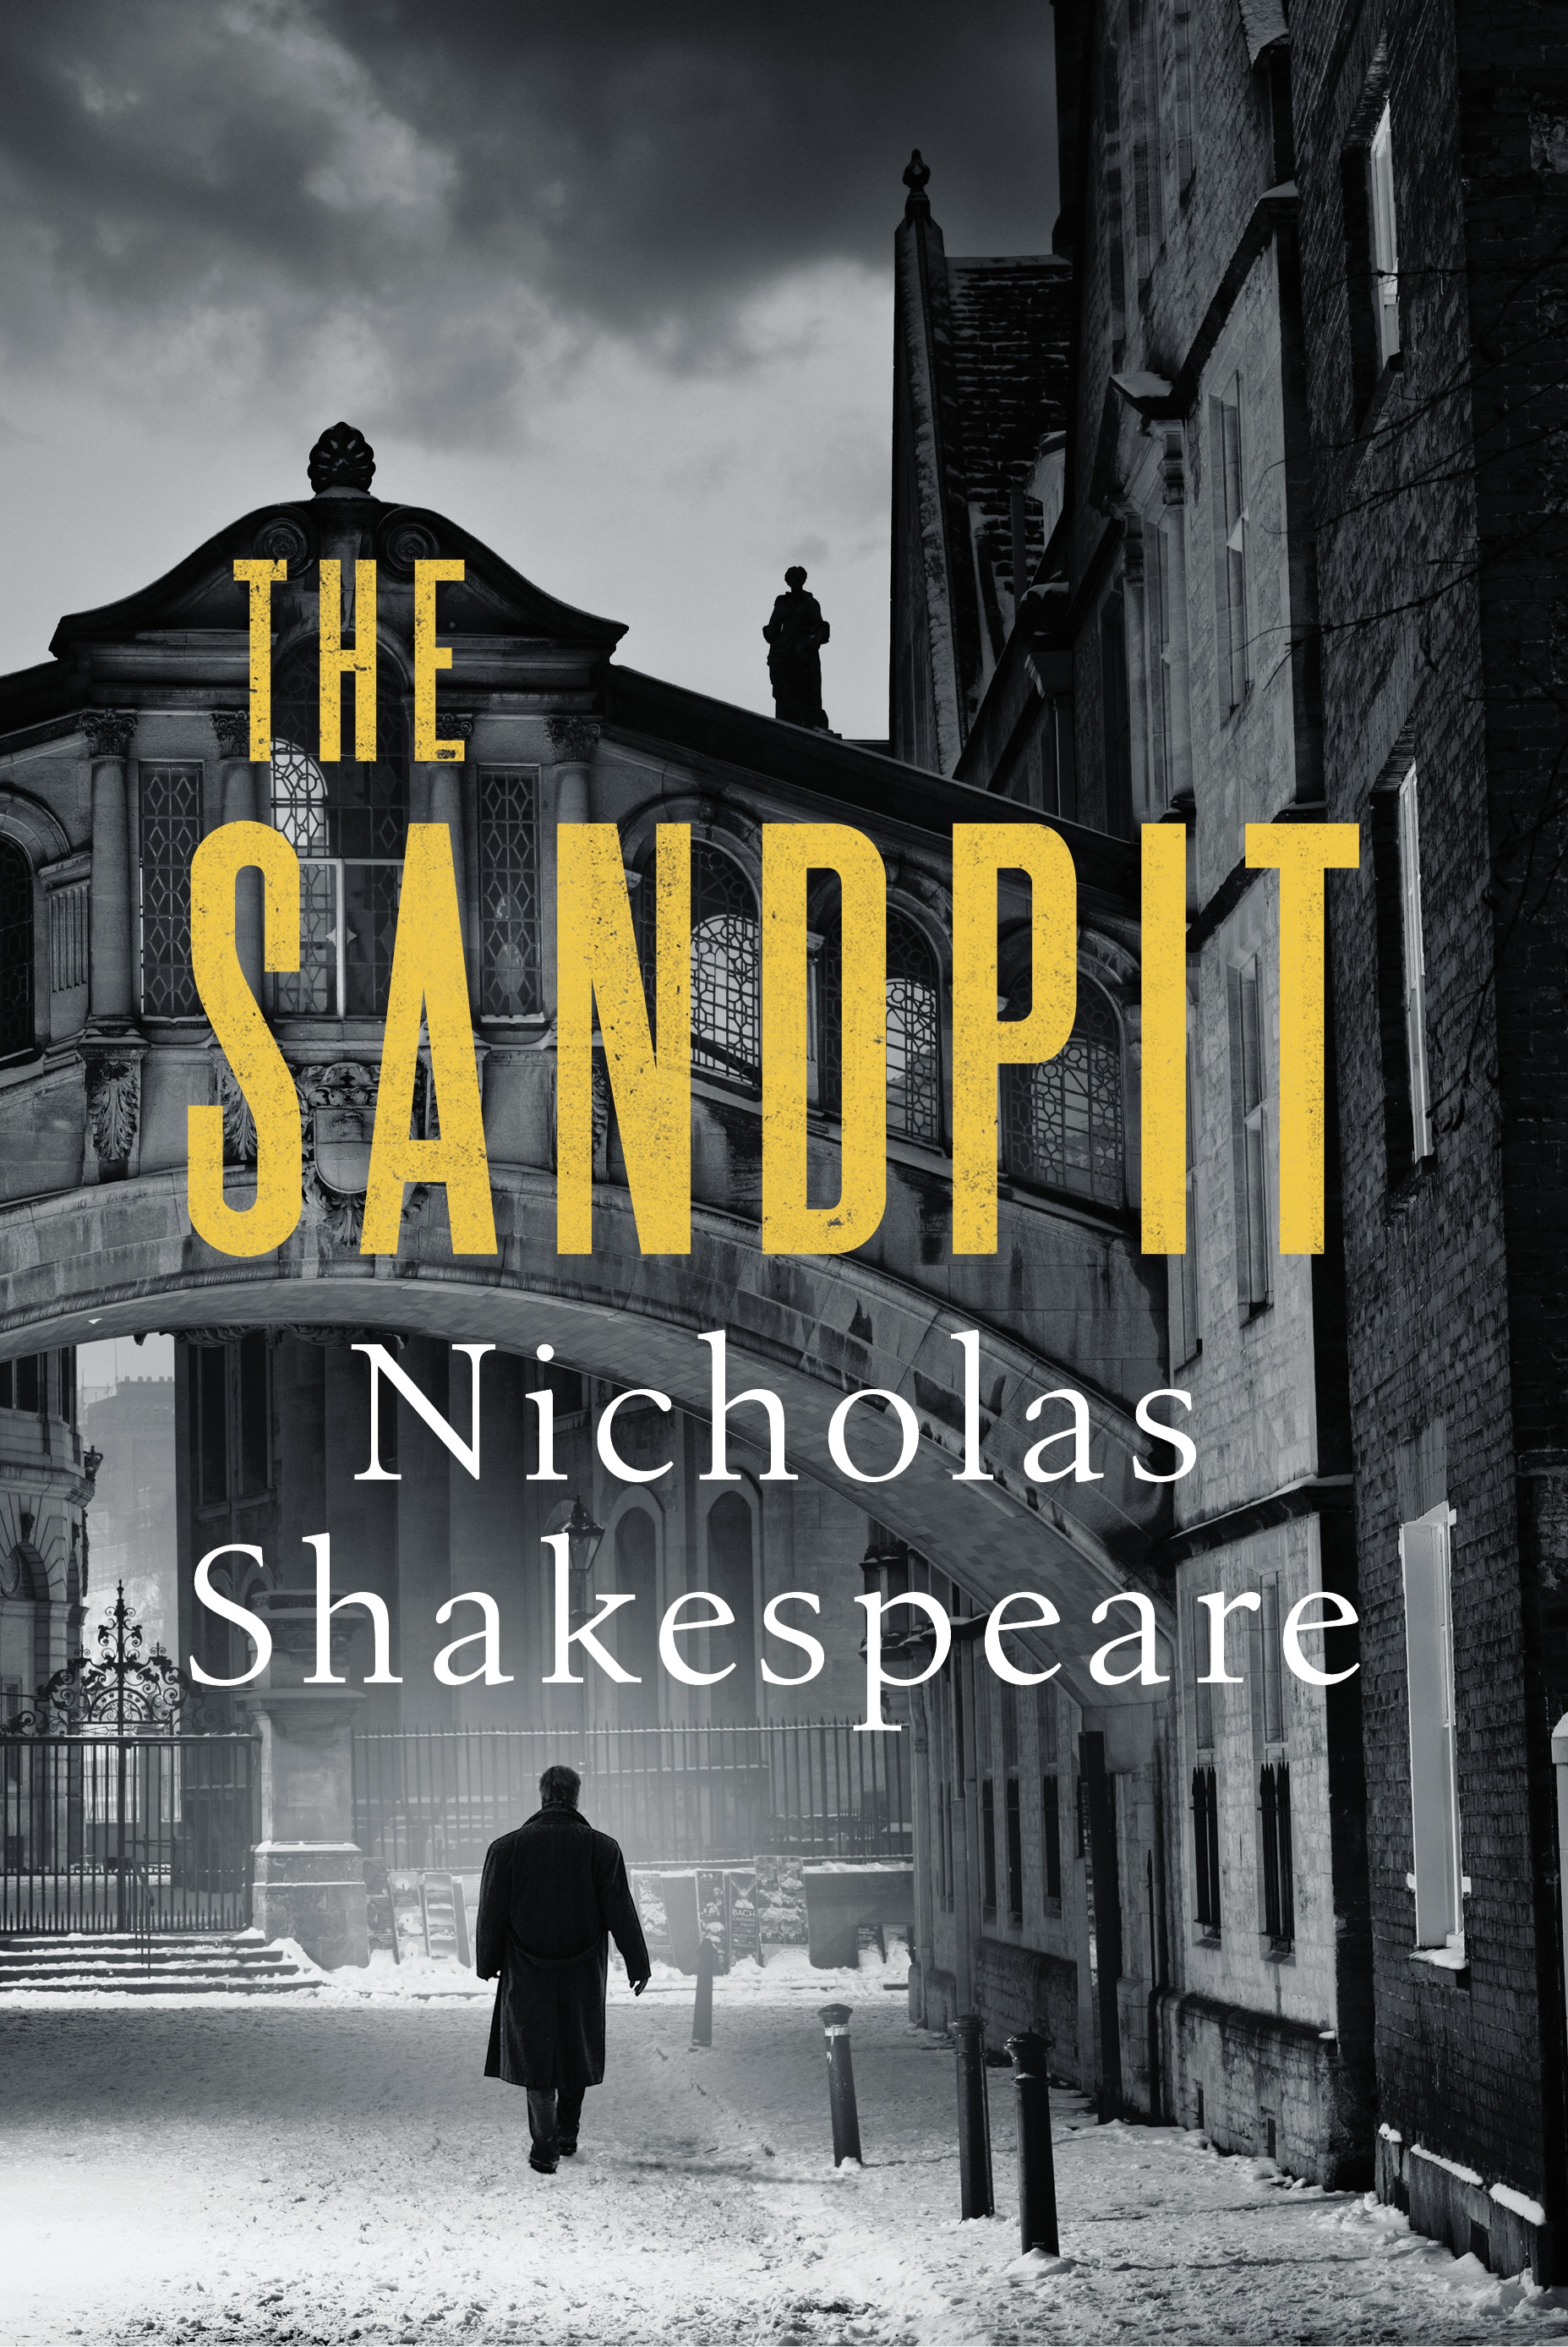 Book “The Sandpit” by Nicholas Shakespeare — July 23, 2020